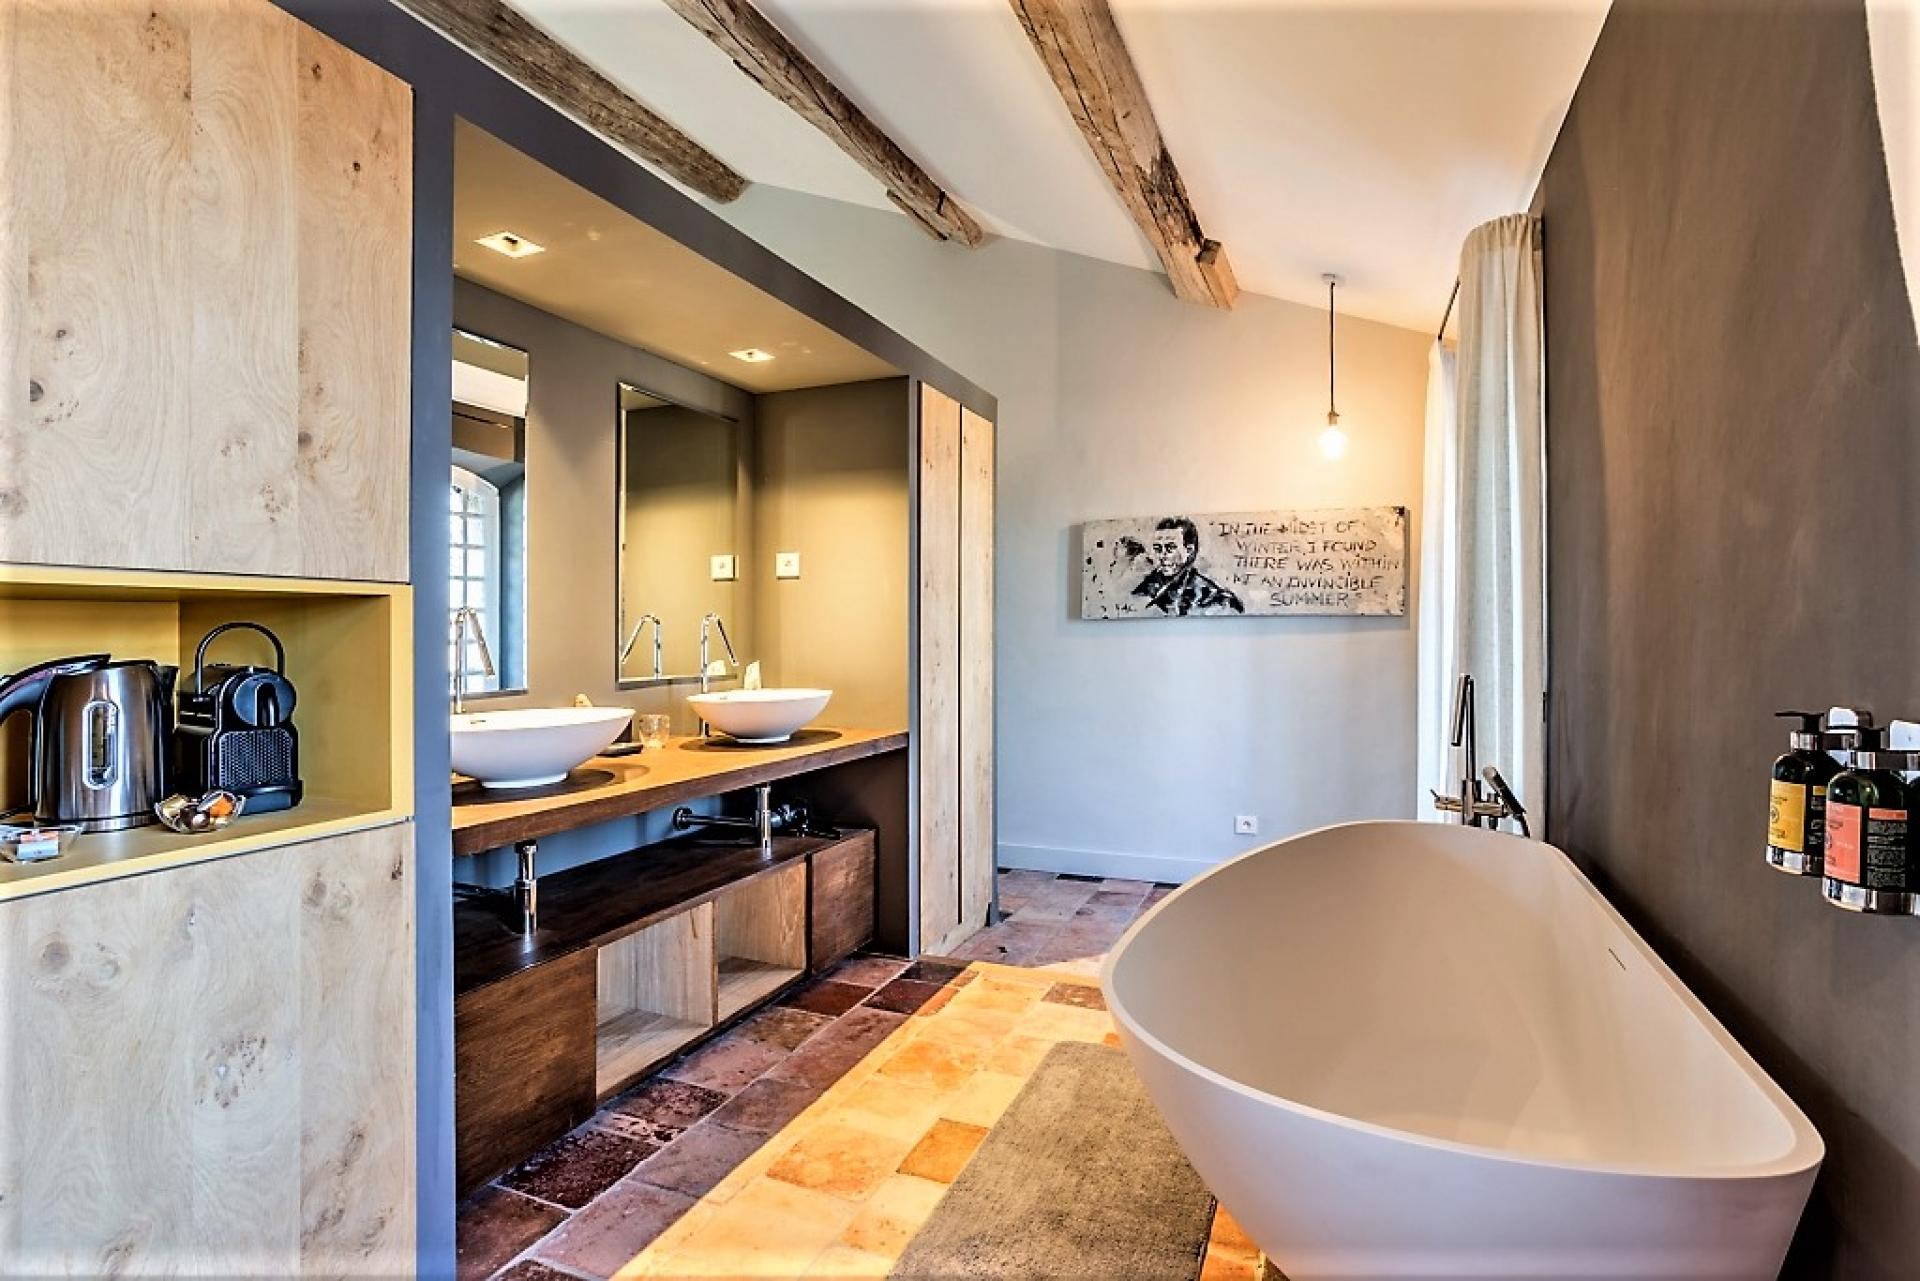 A BATHROOM IN AN HOLIDAY VILLA RENTAL IN PROVENCE